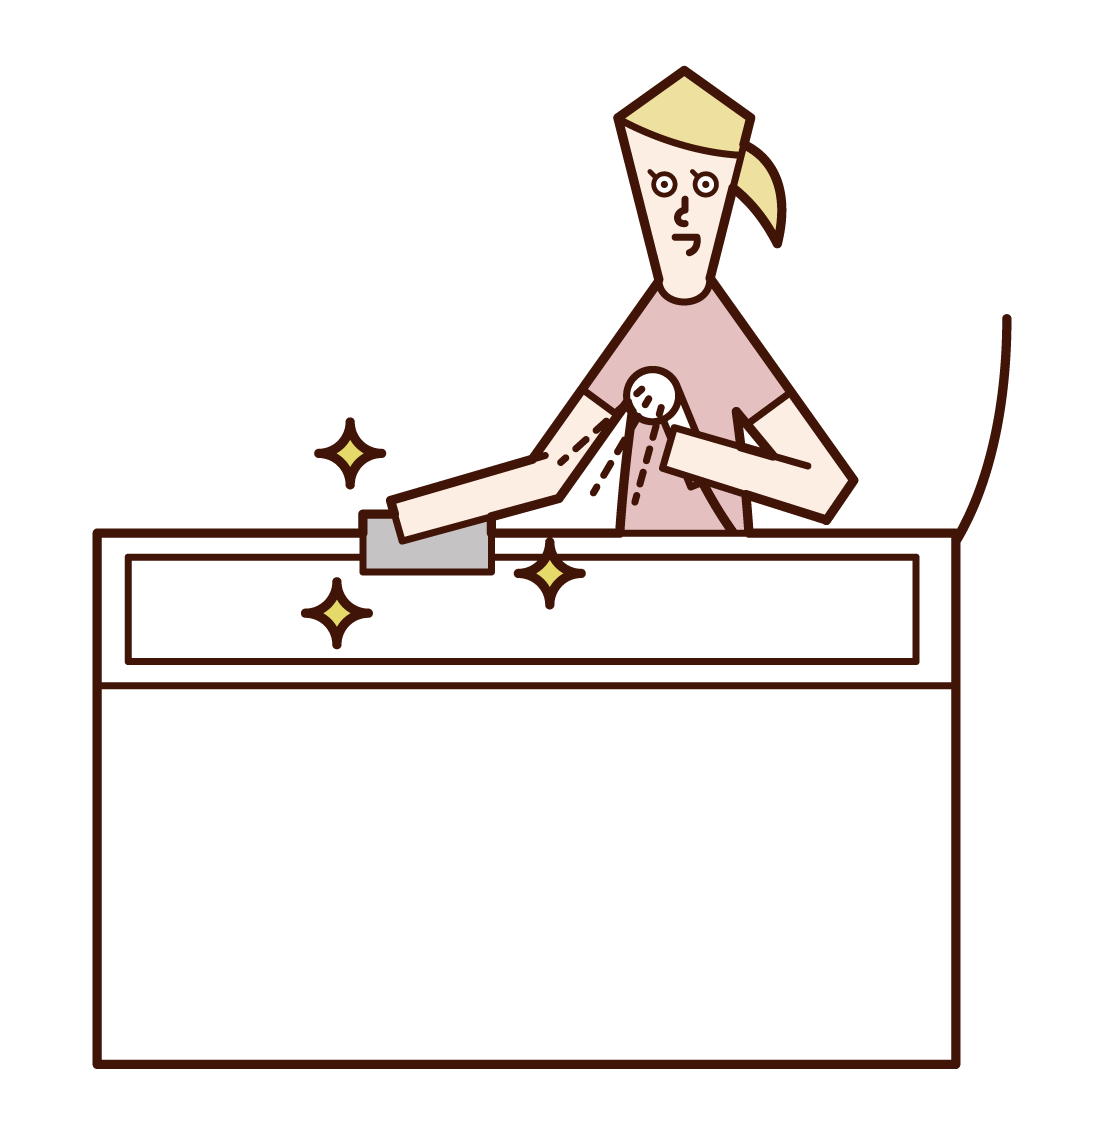 Illustration of a woman cleaning a bath